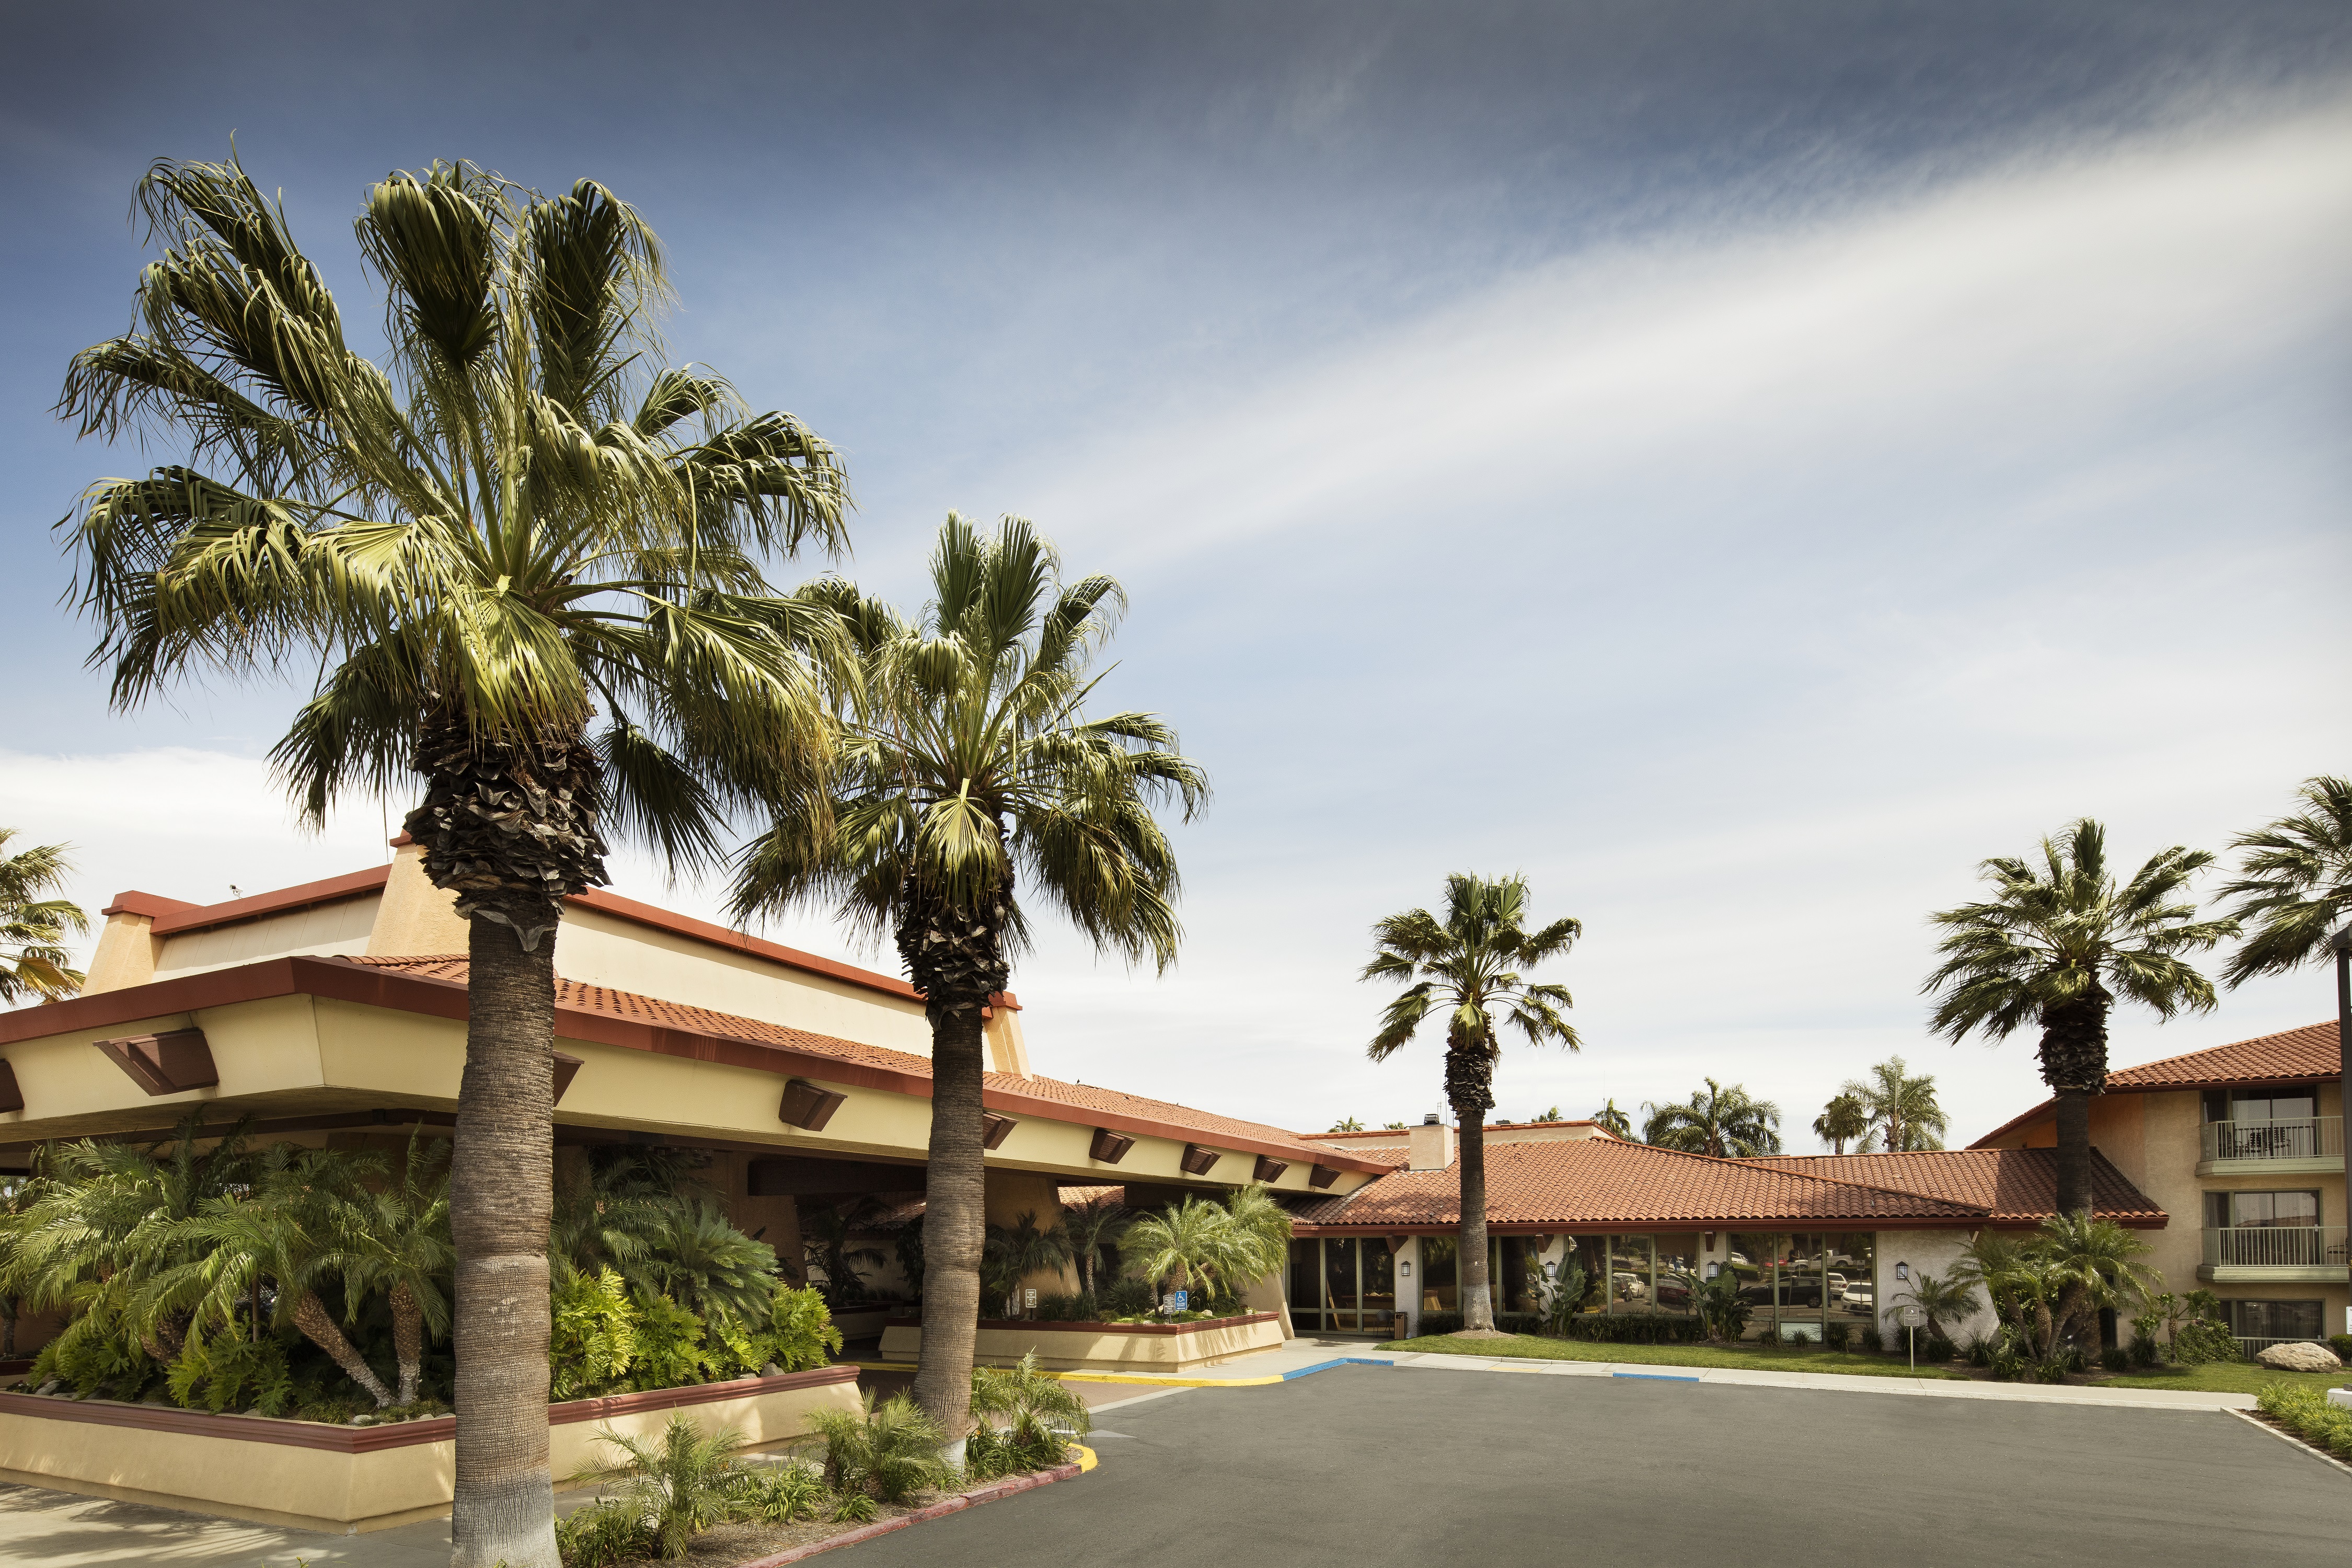 Daytime View of Hotel Exterior and Parking Lot Surrounded by Palm Trees